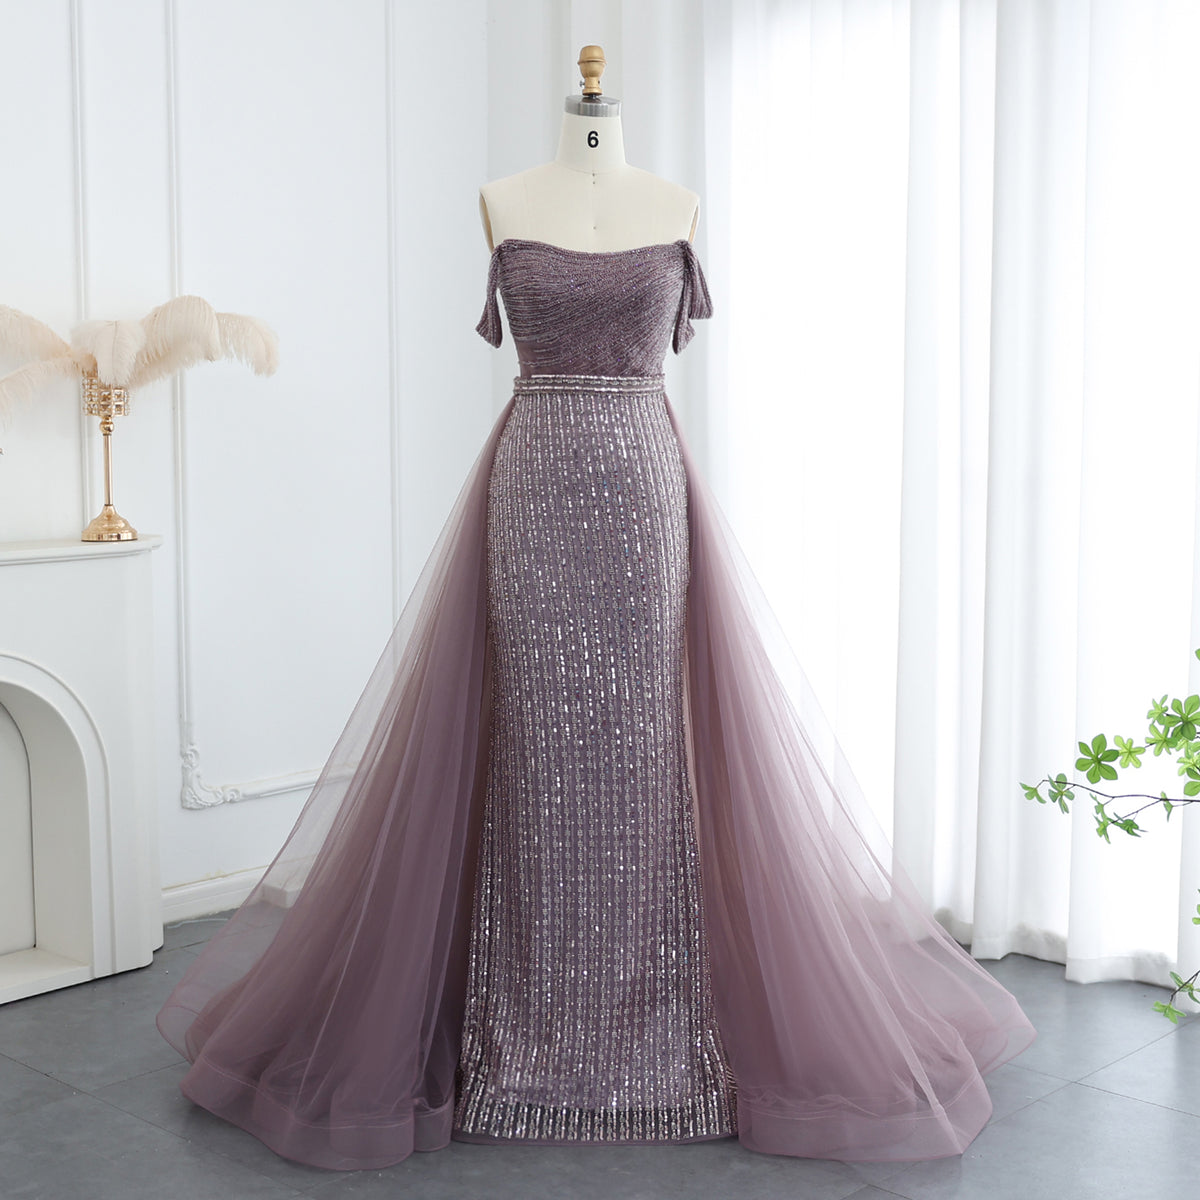 Sharon Said Luxury Beaded Arabic Purple Evening Dresses with Overskirt Off Shoulder Dubai Women Wedding Formal Party Gowns SS137